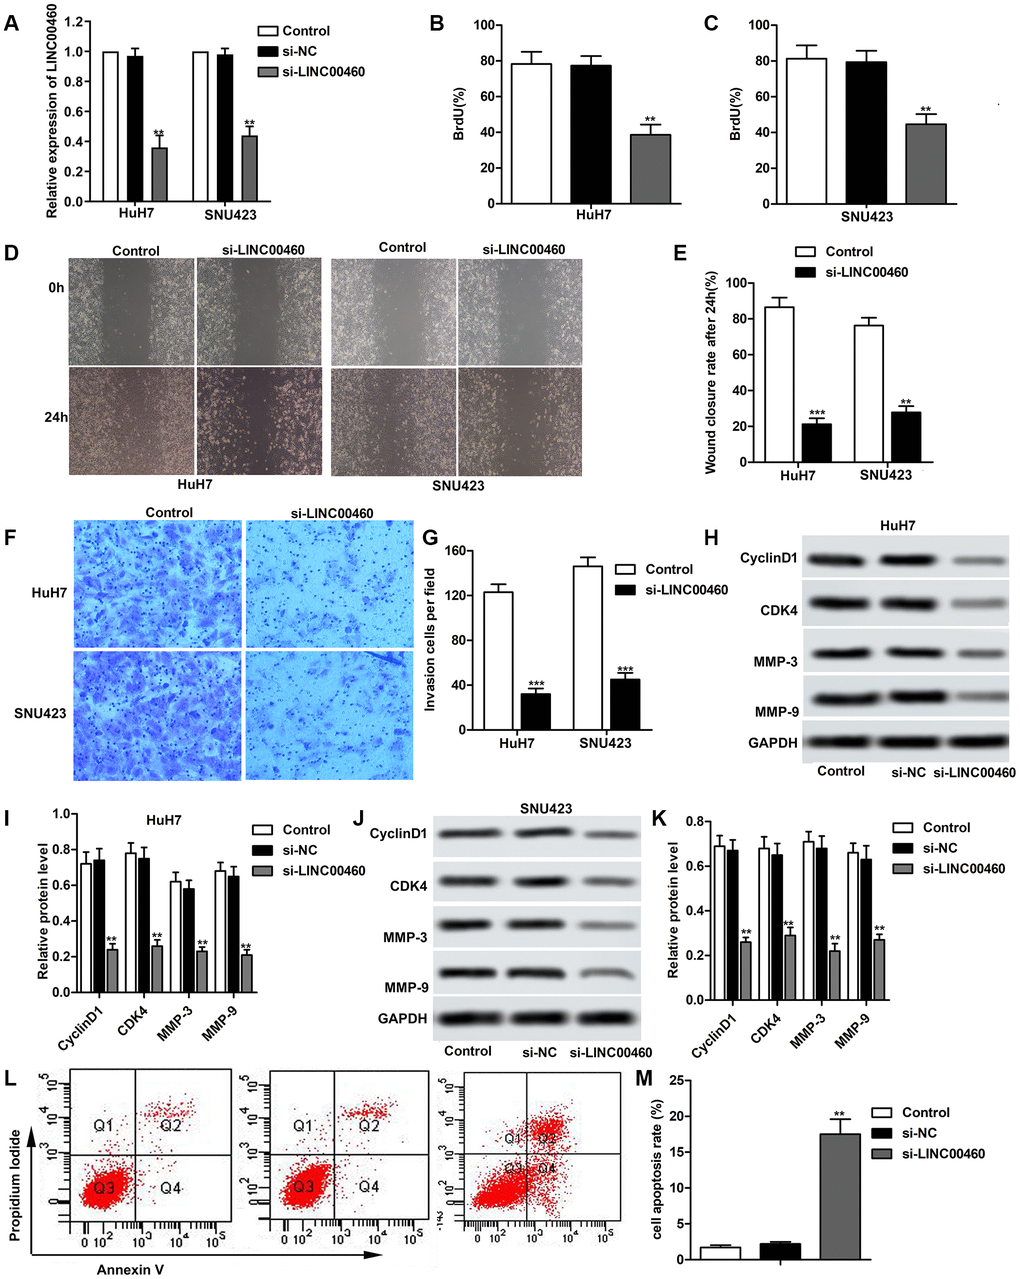 Knockdown of LINC00460 suppresses HCC cell proliferation, migration and invasion. Specific si-LINC00460 was transfected into HuH7 and SNU423 cells, respectively. si-NC was used as a blank. (A) Relative expression of LINC00460 in HuH7 and SNU423 cells was detected through qRT-PCR. (B, C) Bromodeoxyuridine assay was used to value cell proliferation in HuH7 and SNU423 cells, respectively. (D, E) Wound healing assay was conducted to value cell migration ability. Data statistics was also shown. (F, G) Transwell invasion assay showed the invasive cells in each group. Data statistics was also shown. (H, I) Western blot showed the expression of cell proliferation related proteins CyclinD1 and CDK4 and cell migration related proteins MMP-3 and MMP-9 in HuH7 cells. Data statistics was also shown. (J, K) Western blot showed the expression of CyclinD1, CDK4, MMP-3 and MMP-9 in SNU423 cells. Data statistics was also shown. (L) Flow cytometry was conducted to value cell apoptosis. (M) Cell apoptosis rate was calculated and presented. **P ***P 